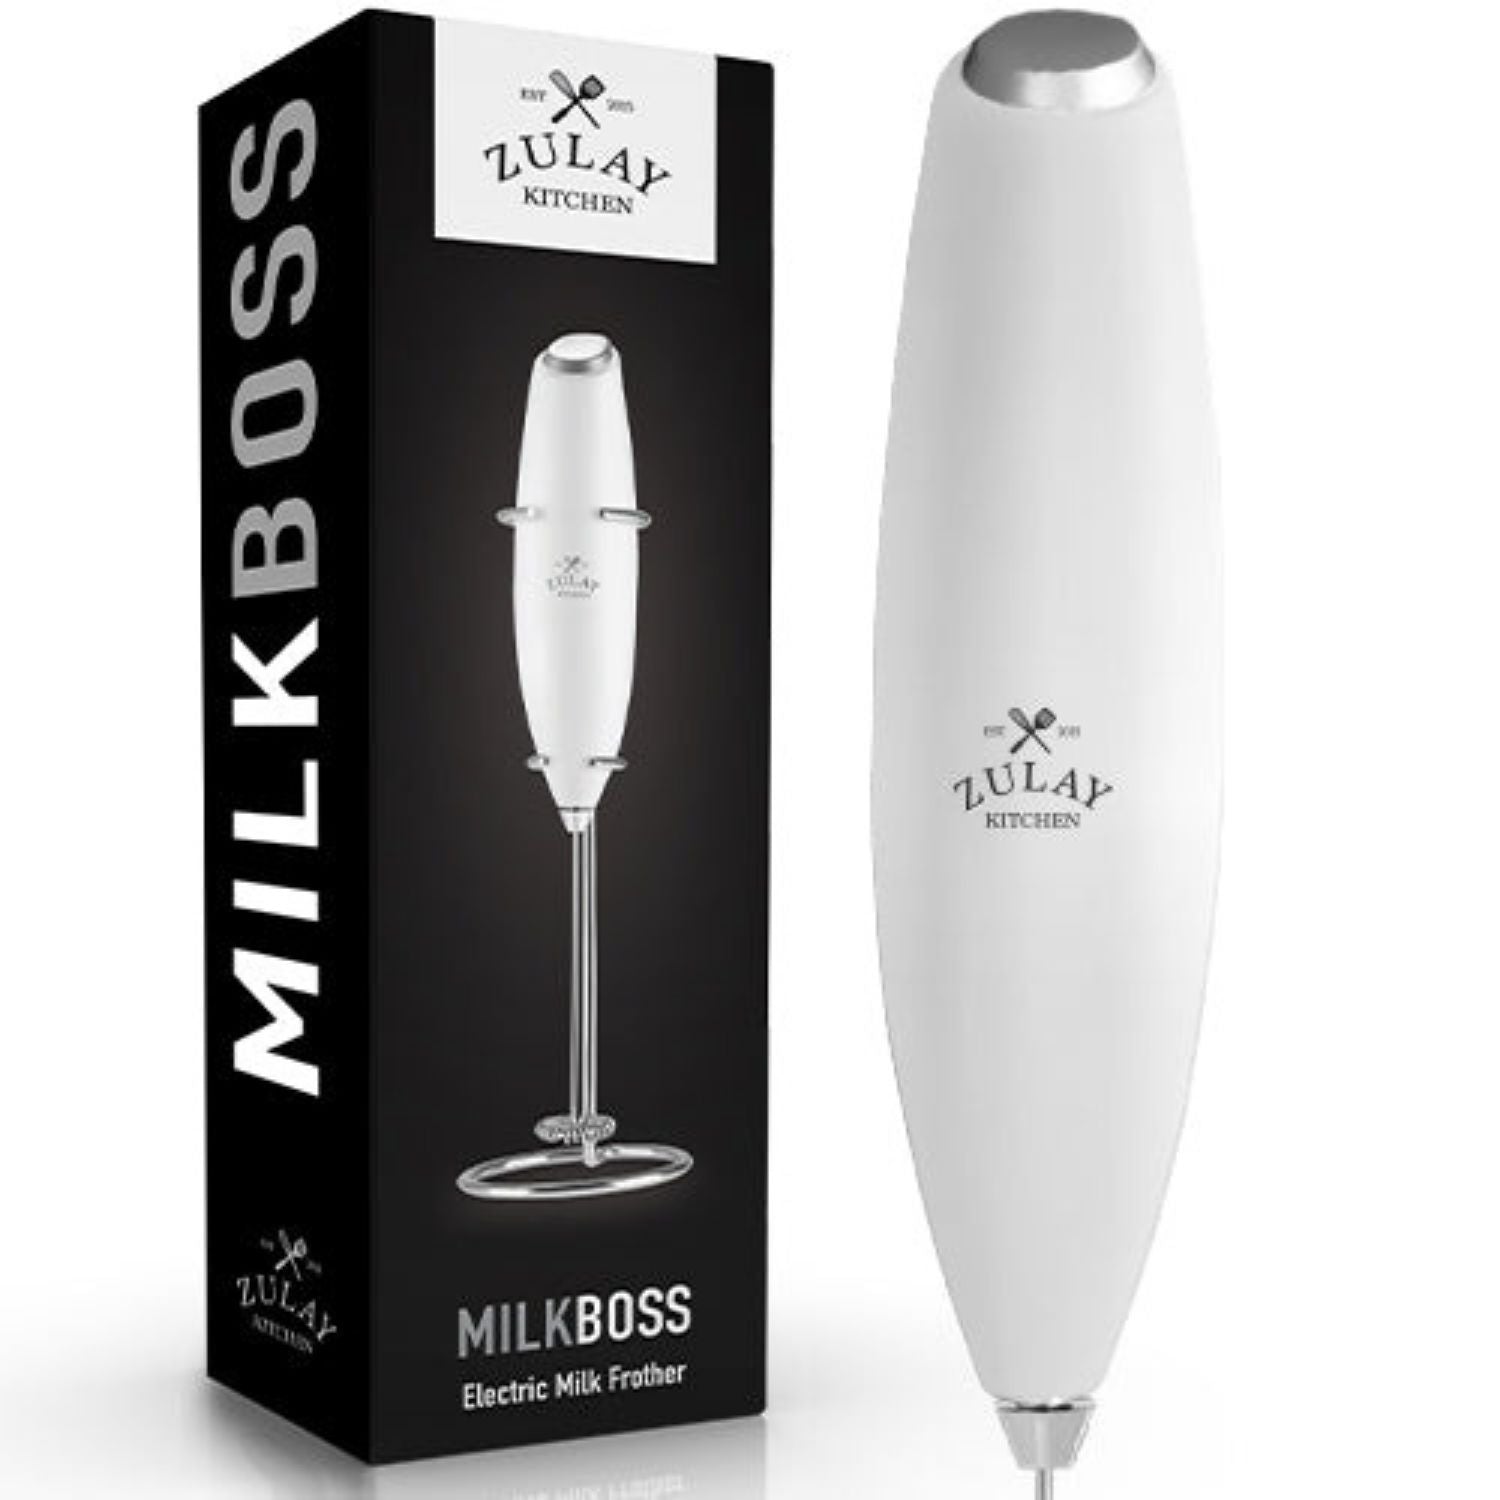 Zulay Kitchen Milk Boss Milk Frother With Stand - White and Black, 1 -  Kroger